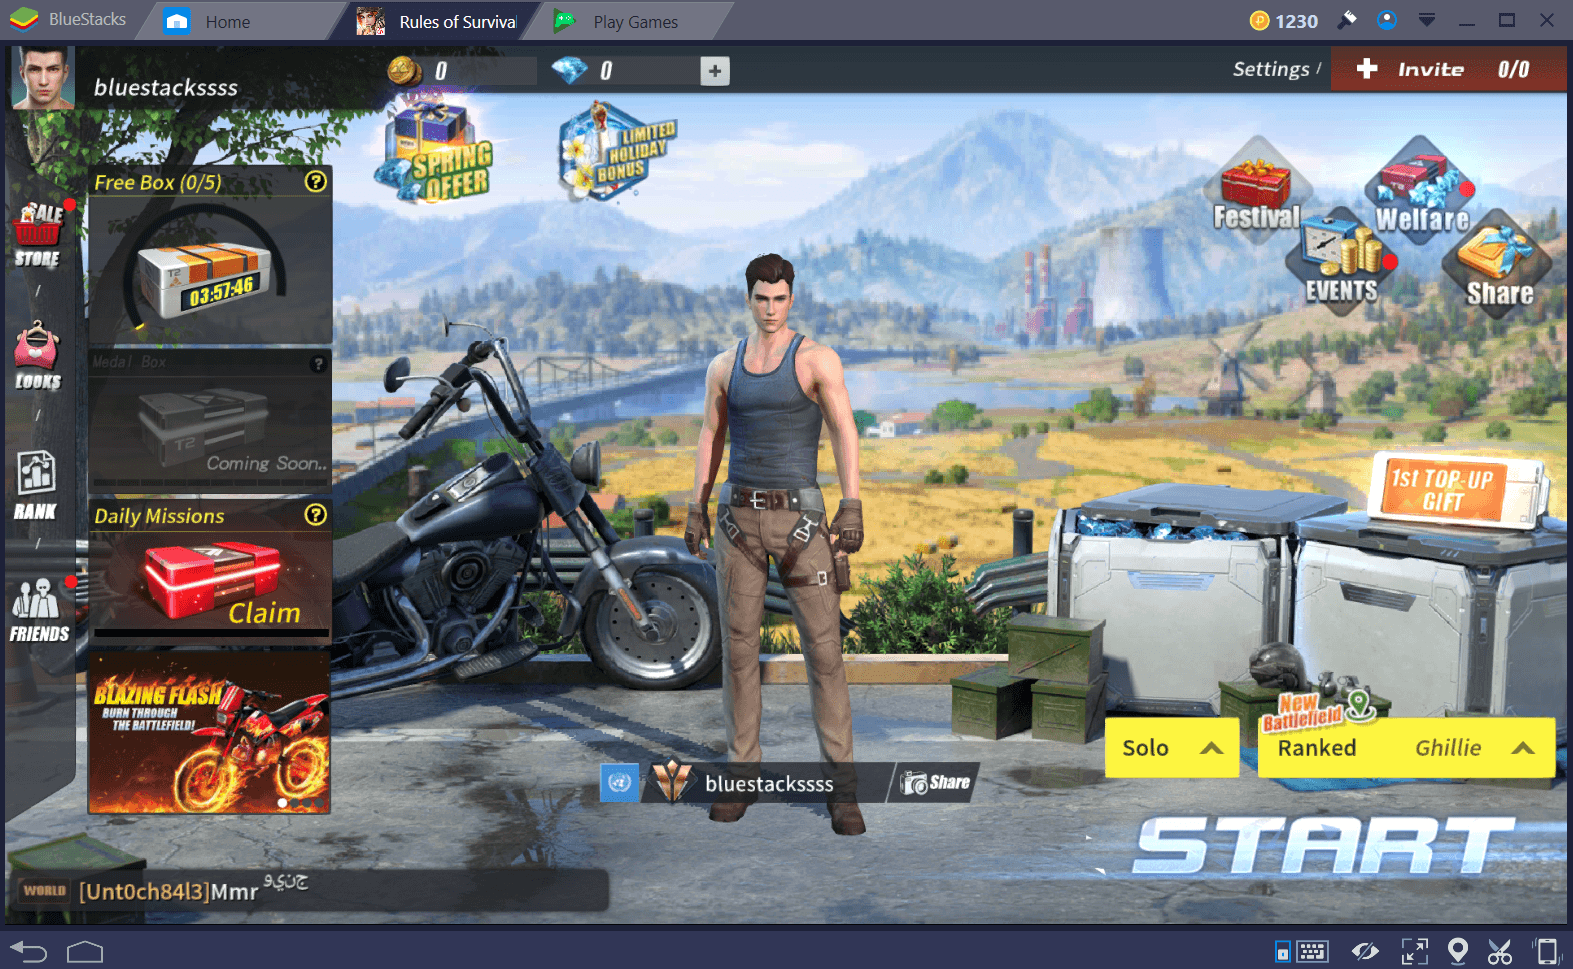 Review Rules of Survival